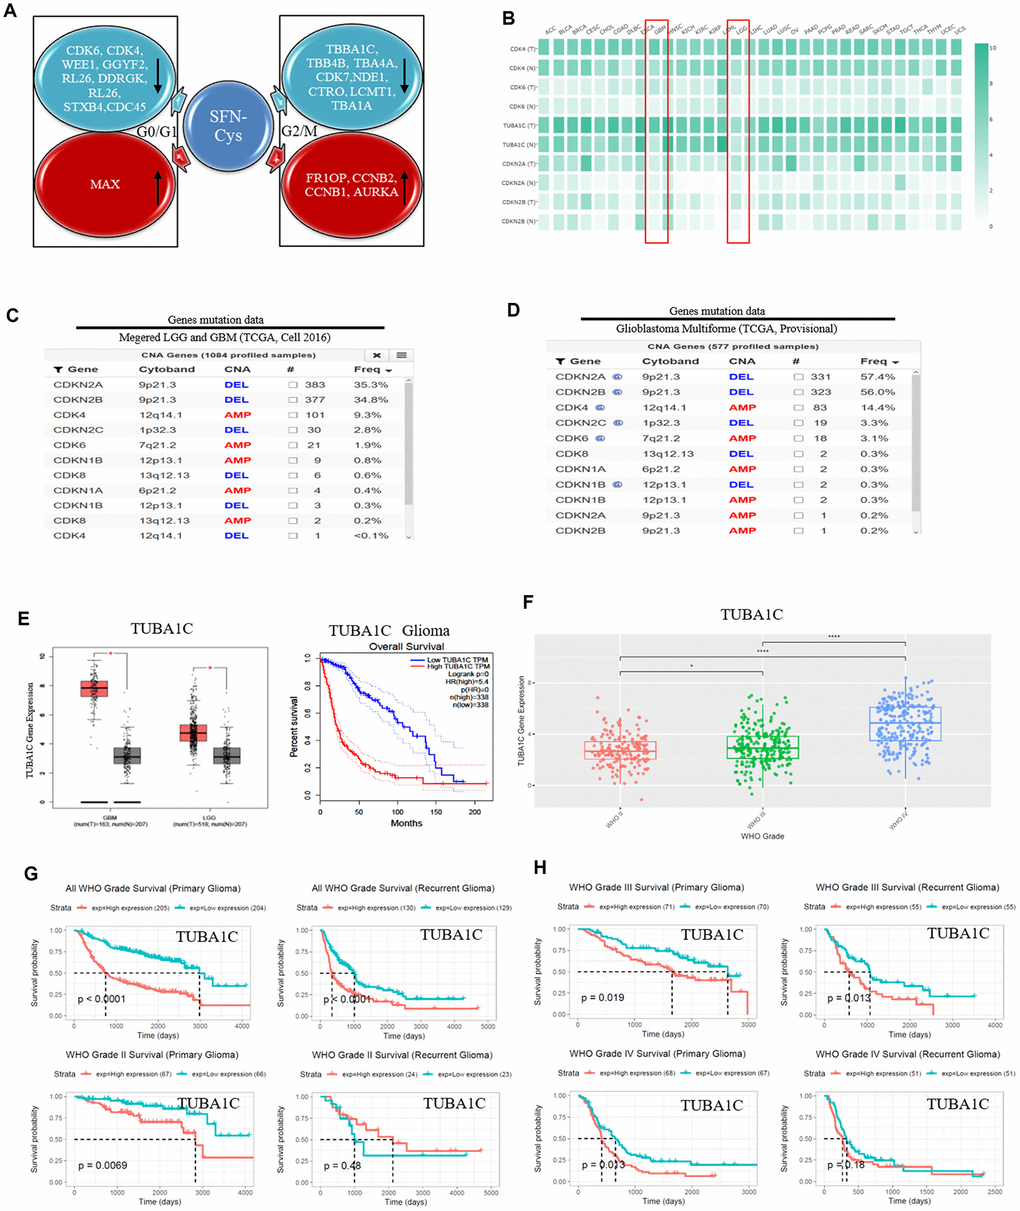 SFN-Cys decreased the expressions of CDK4/CDK6 and TUBA1C. TUBA1C mRNA expression showed positive correlation to pathological grades and negative correlation to clinical prognosis in glioma. The deletion rates of CDKN2A and CDKN2B were higher in glioma patients. (A) After U87MG cells were treated with or without SFN-Cys for 24 h, the extracted proteins were analyzed for expression; protein expressions and Ontology were analyzed via HPLC-MS/MS and the Uniprot net. (B) Differential expressions of mRNA were analyzed in normal and tumor tissues via GEPIA database, which matched TCGA normal and GTEx data [46]. LGG: Low grade glilma. (C, D) The deletion rates of CDKN2A and CDKN2B were analyzed by means of database of Glioblastoma Multiforme (TCGA, Provisional) and of Merged Cohort of LGG and GBM (TCGA, Cell 2016) via cBioPortal for Cancer Genomics. (E) The expression and survival analysis of TUBA1C mRNA in glioma patients were done via GEPIA Database, which matched TCGA normal and GTEx data. (F–H). The expression and survival analysis of TUBA1C mRNA in glioma patients with primary and recurrent were done via CGGA database. Data were shown as *P 